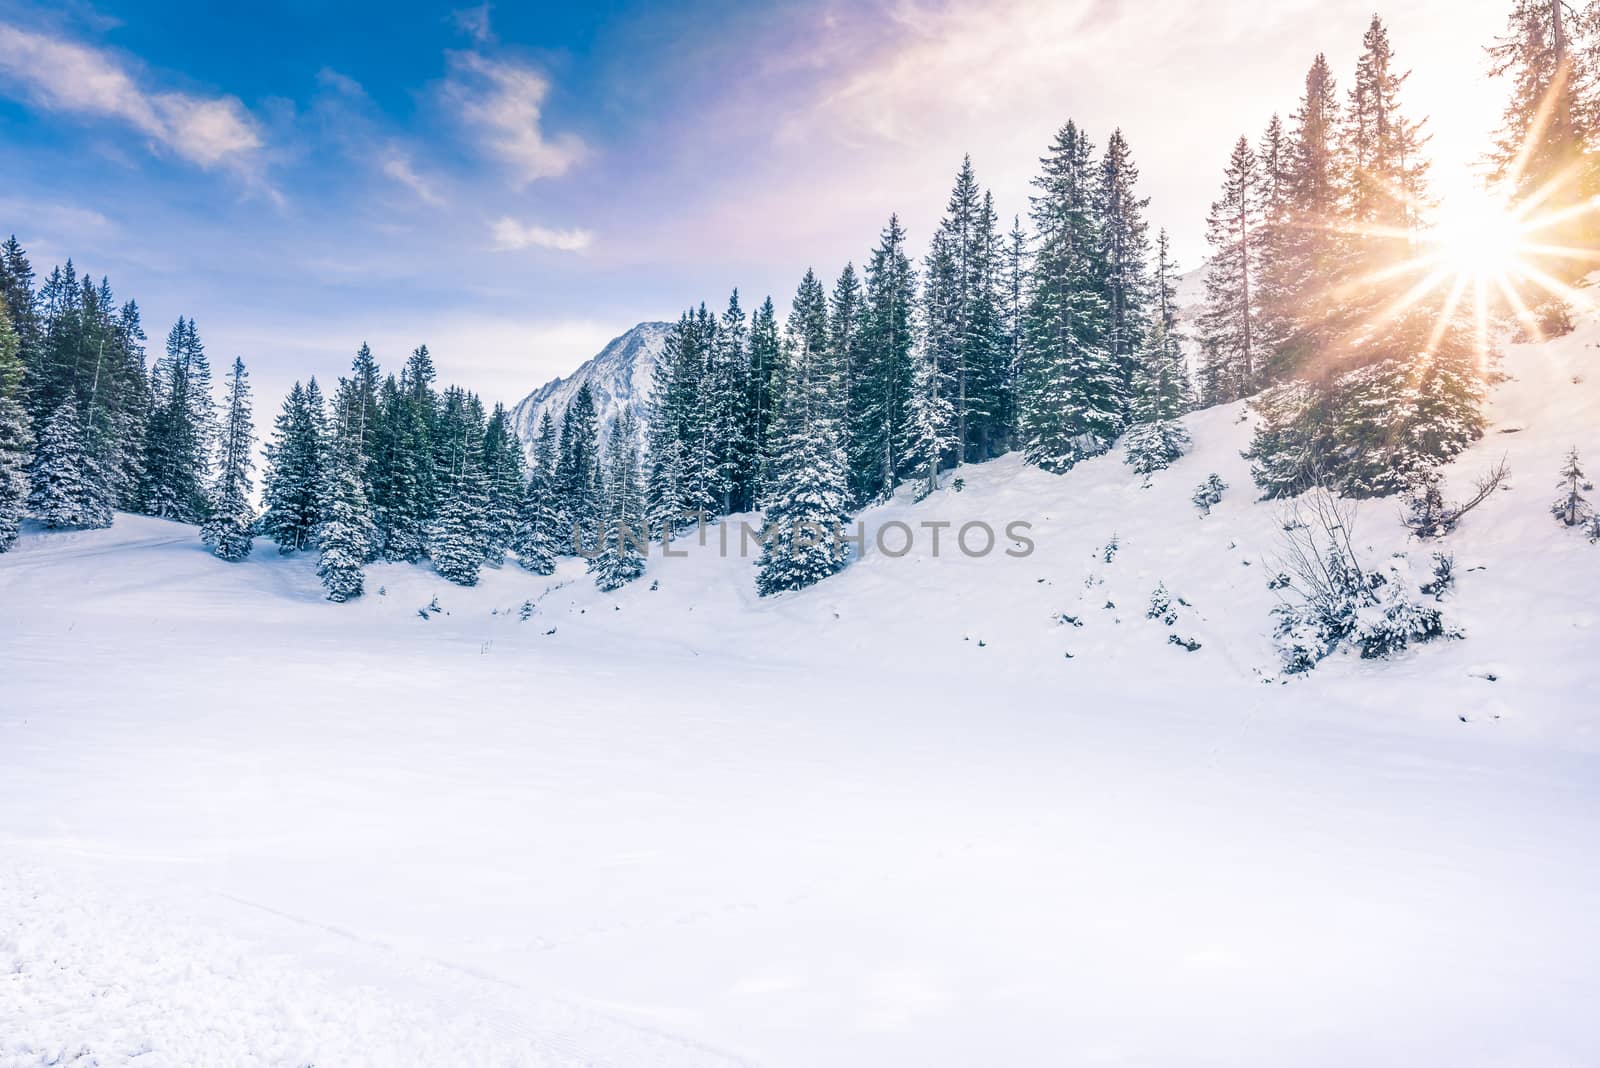 Lovely winter landscape with the evergreen fir forests warmed up by  the orange sun and its rays, while everything is covered in snow. Image taken in Ehrwald, Austria.